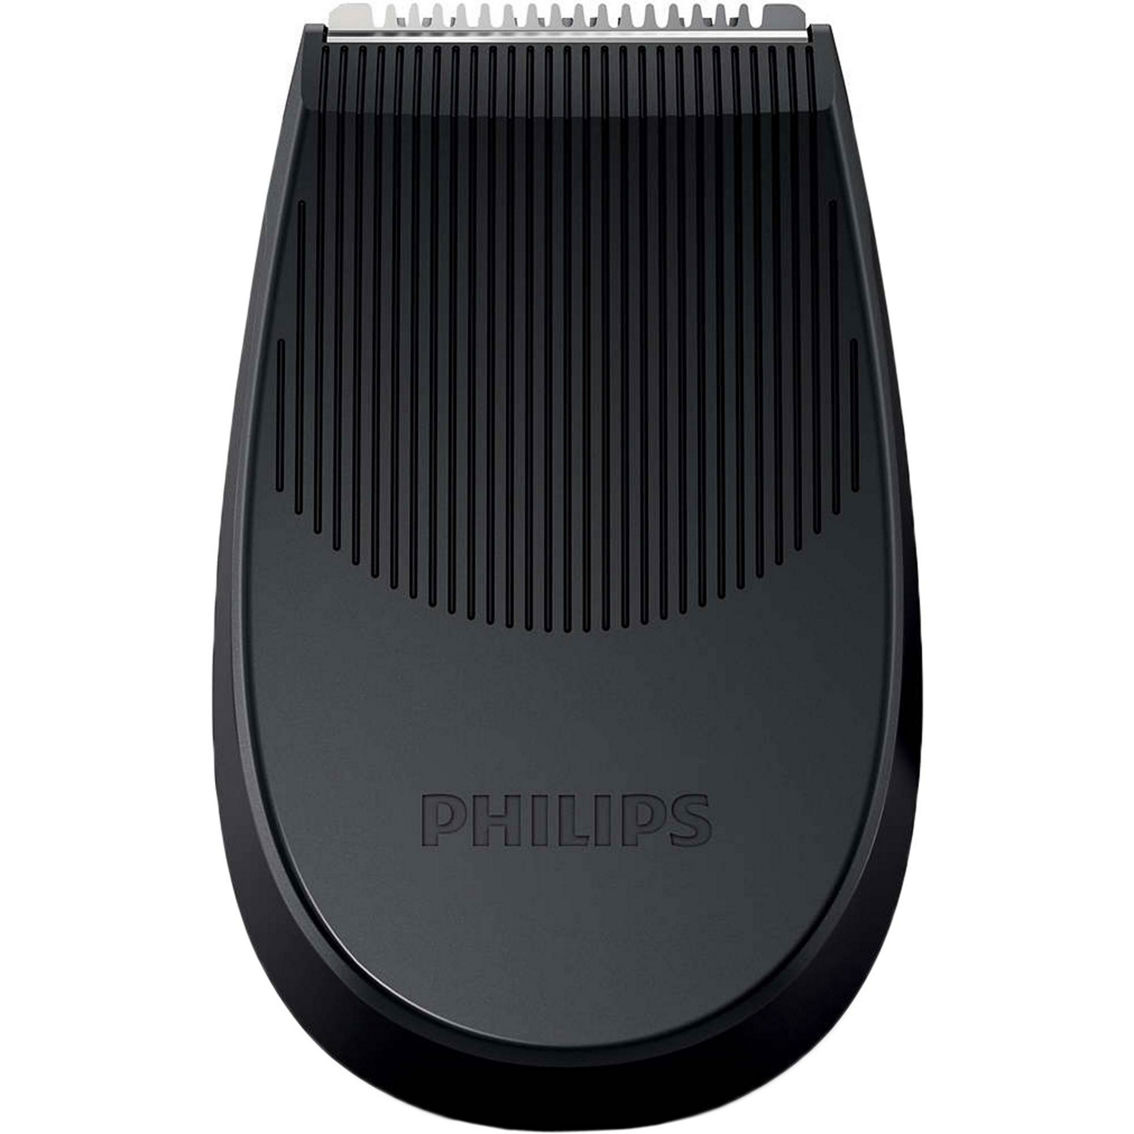 Philips Norelco 5300 Shaver - Image 6 of 9